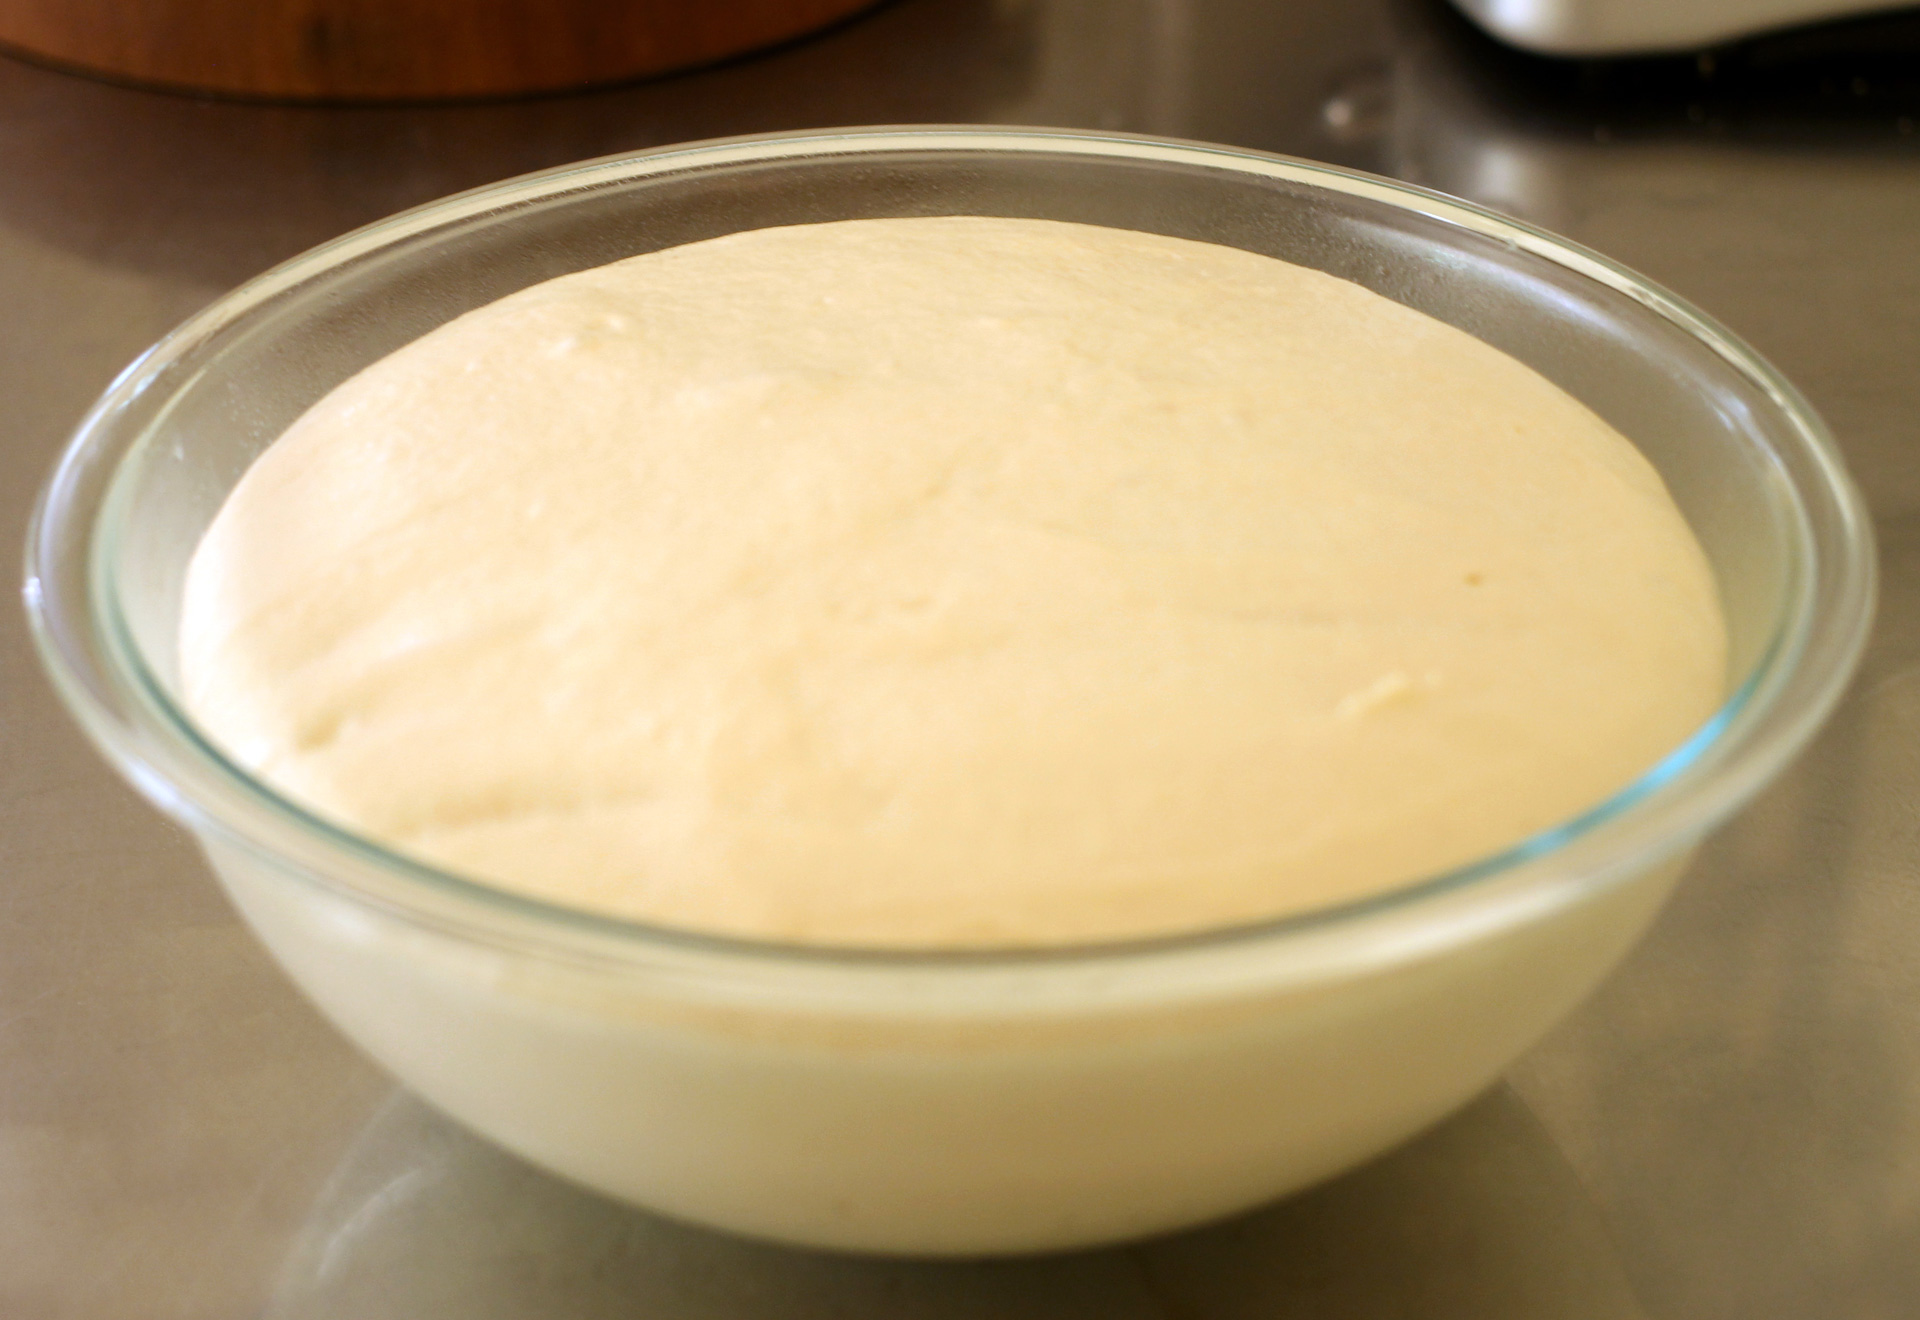 The dough should double in size in about an hour.